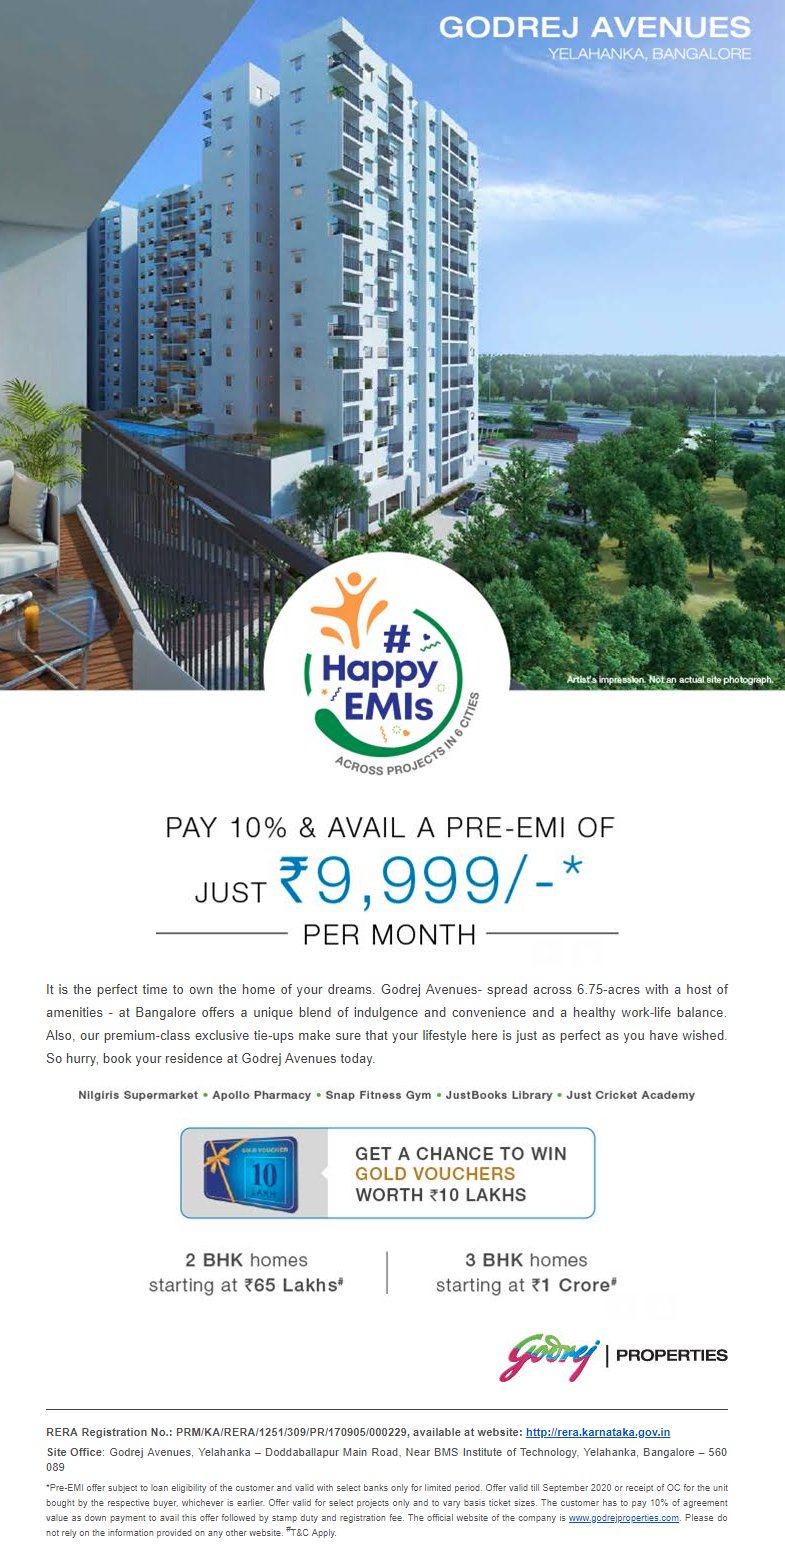 Pay 10% & avail a pre-EMI of Rs. 9999 per month at Godrej Avenues in Bangalore Update